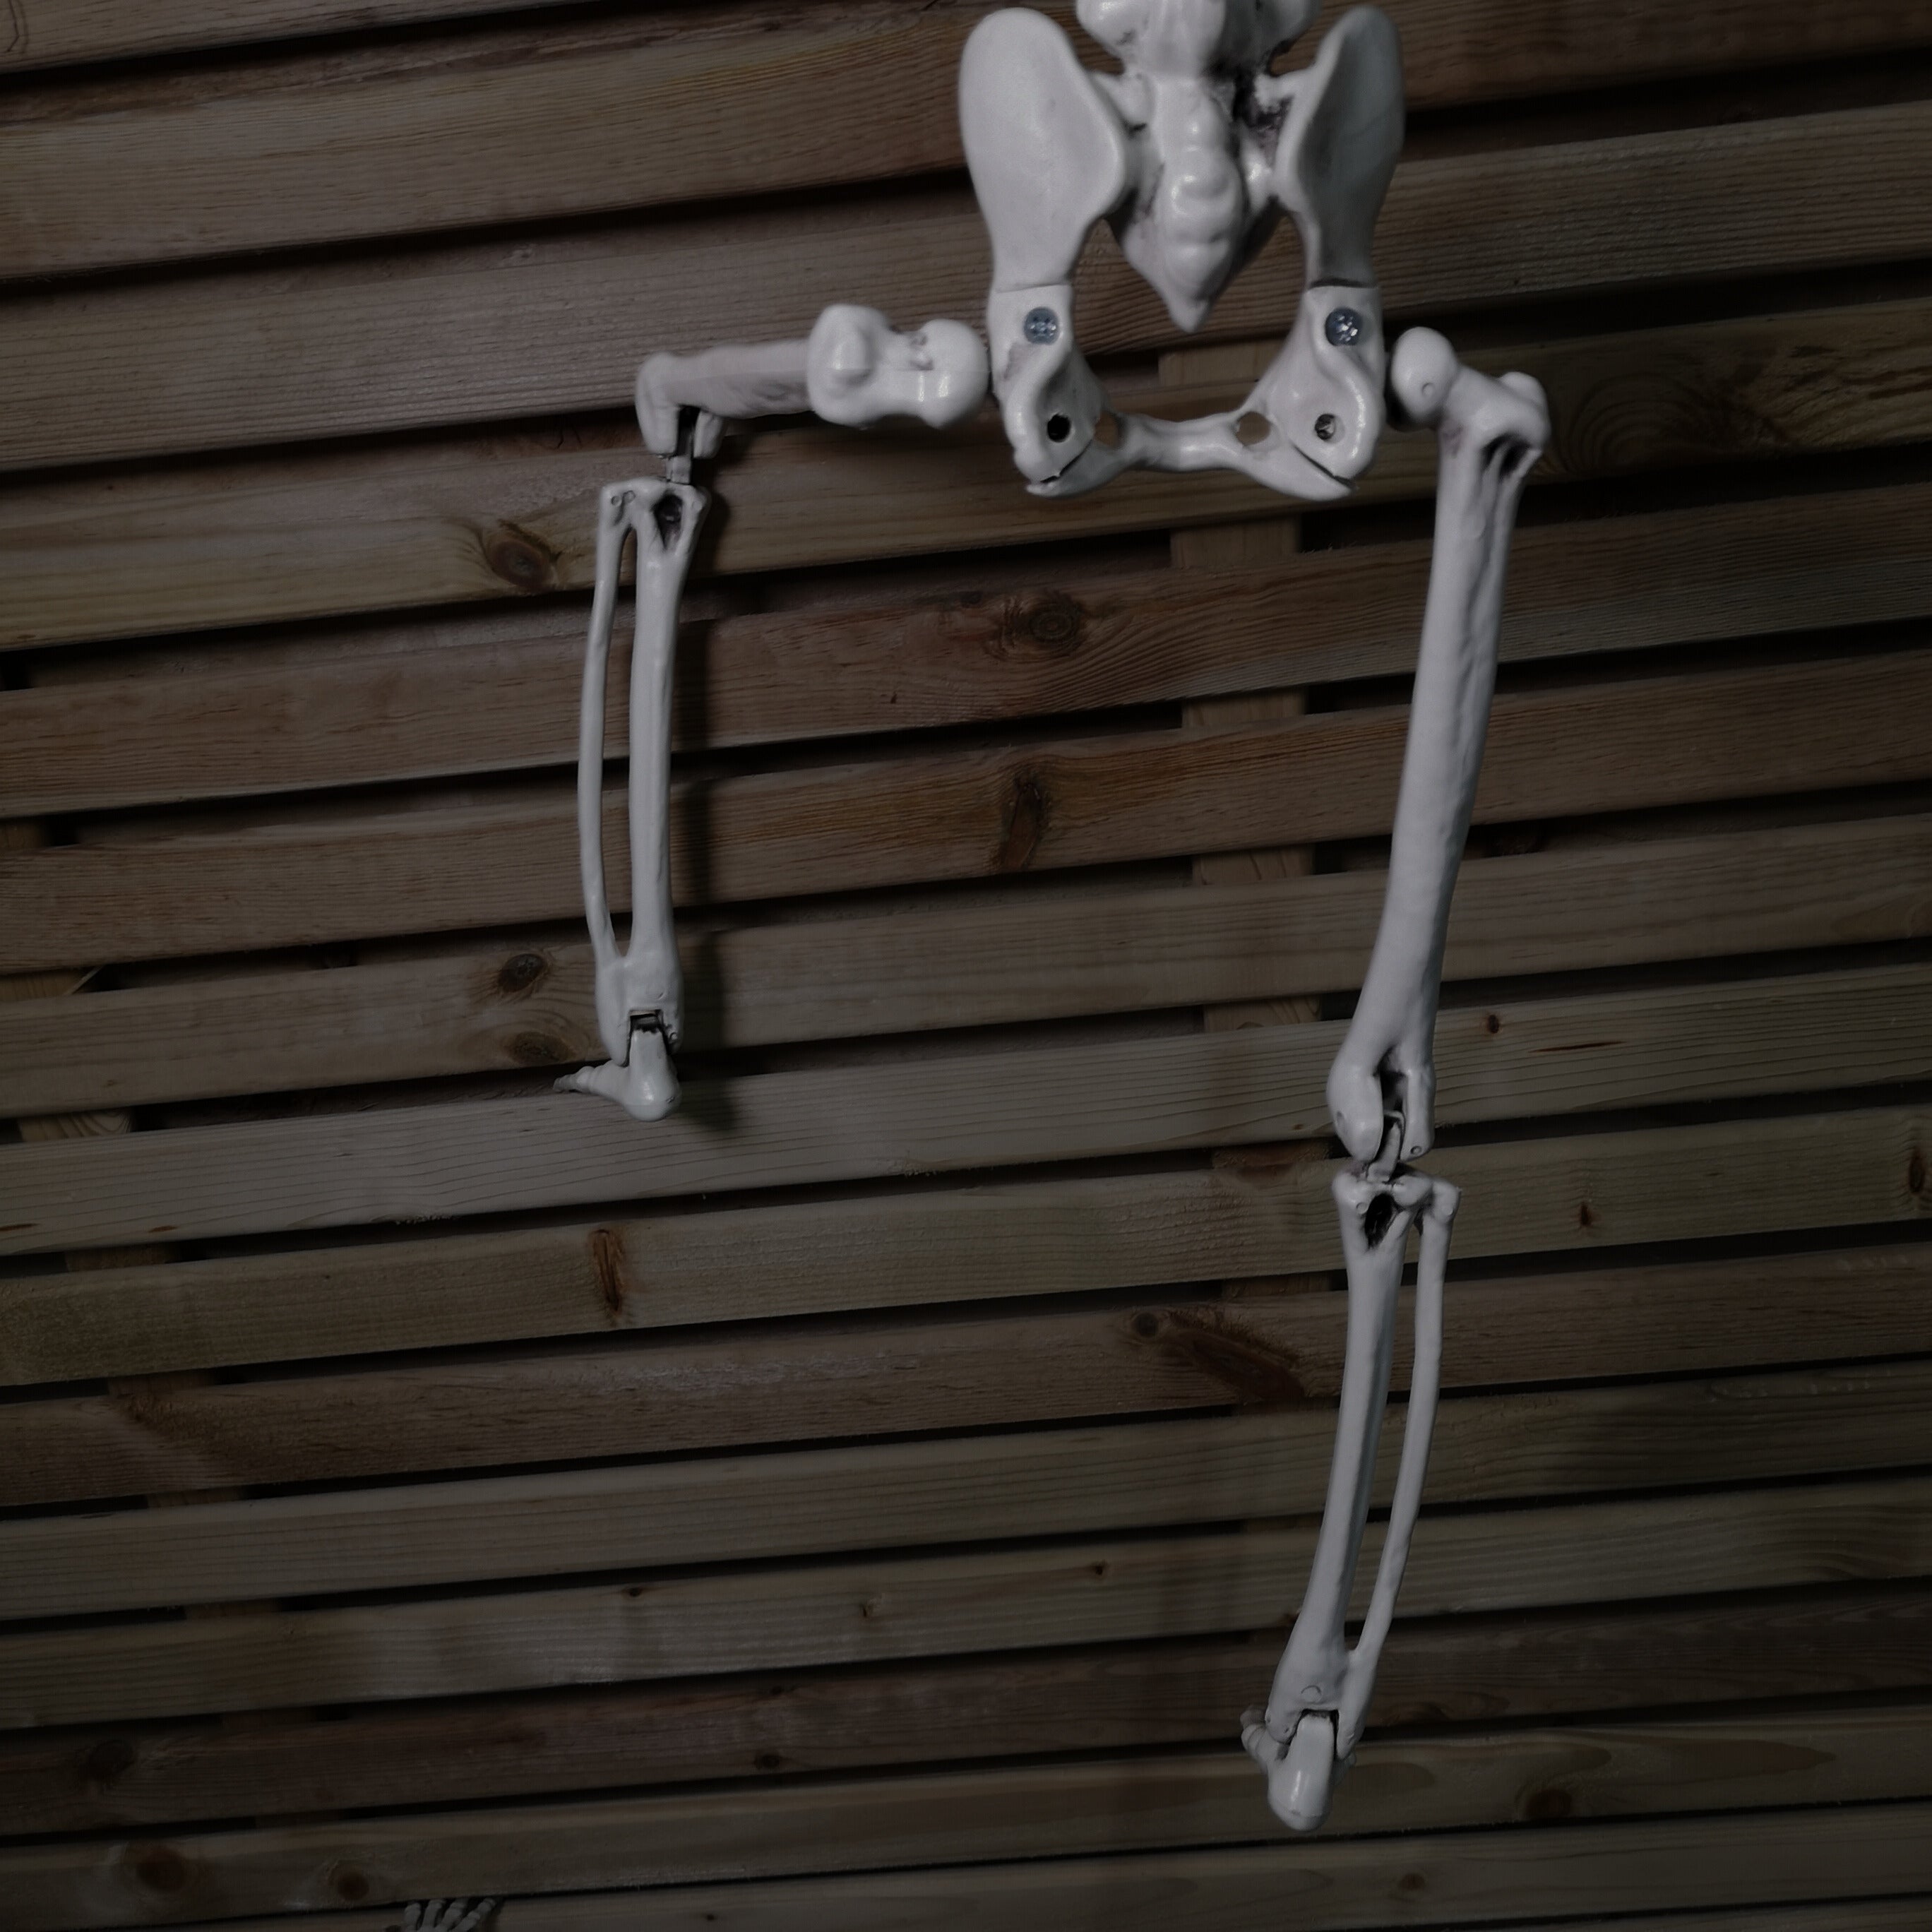 90cm (3ft) Posable Full Body Halloween Skeleton Decoration with Movable Joints